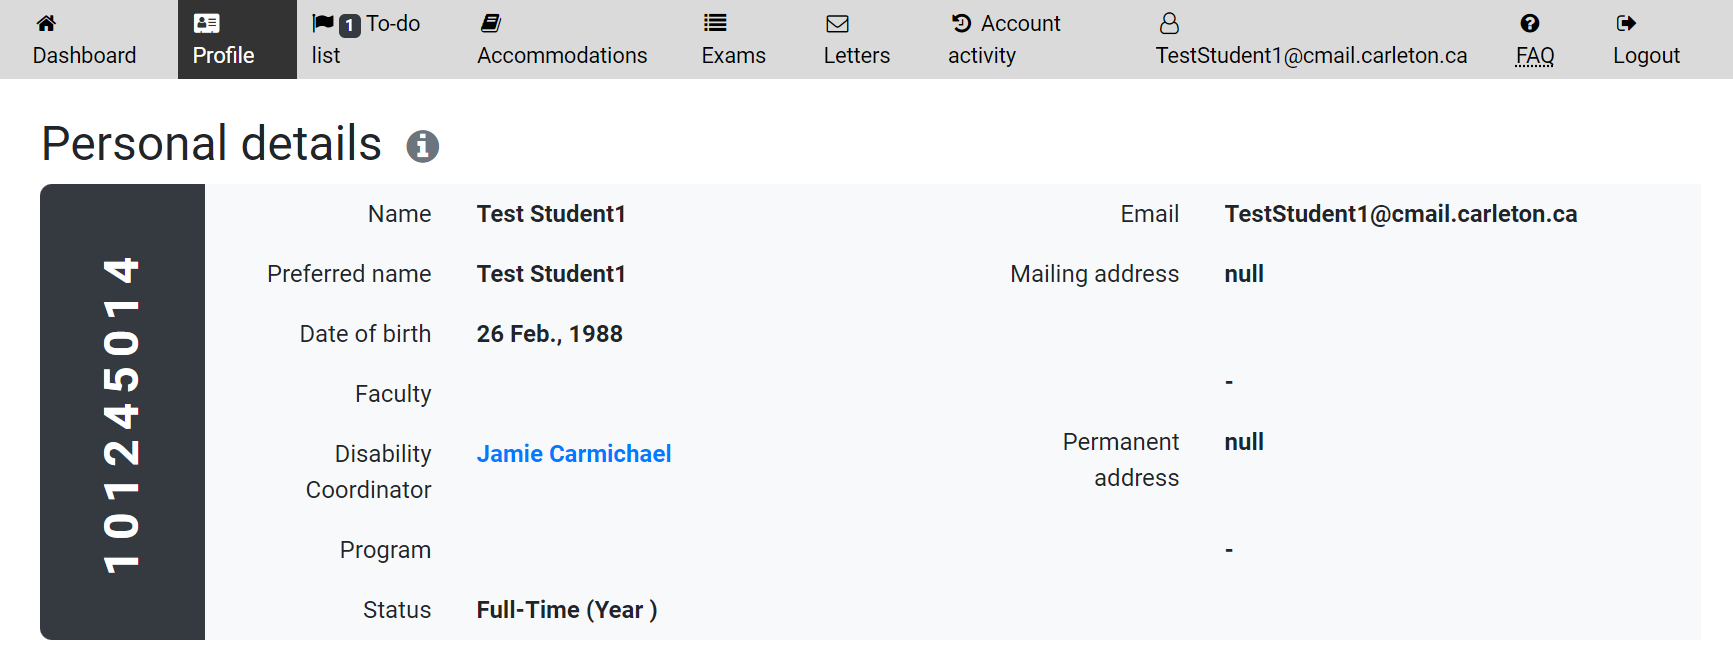 Screenshot of the Student portal Profile tab showing the top part of the screen with Test Student1's Personal Details section